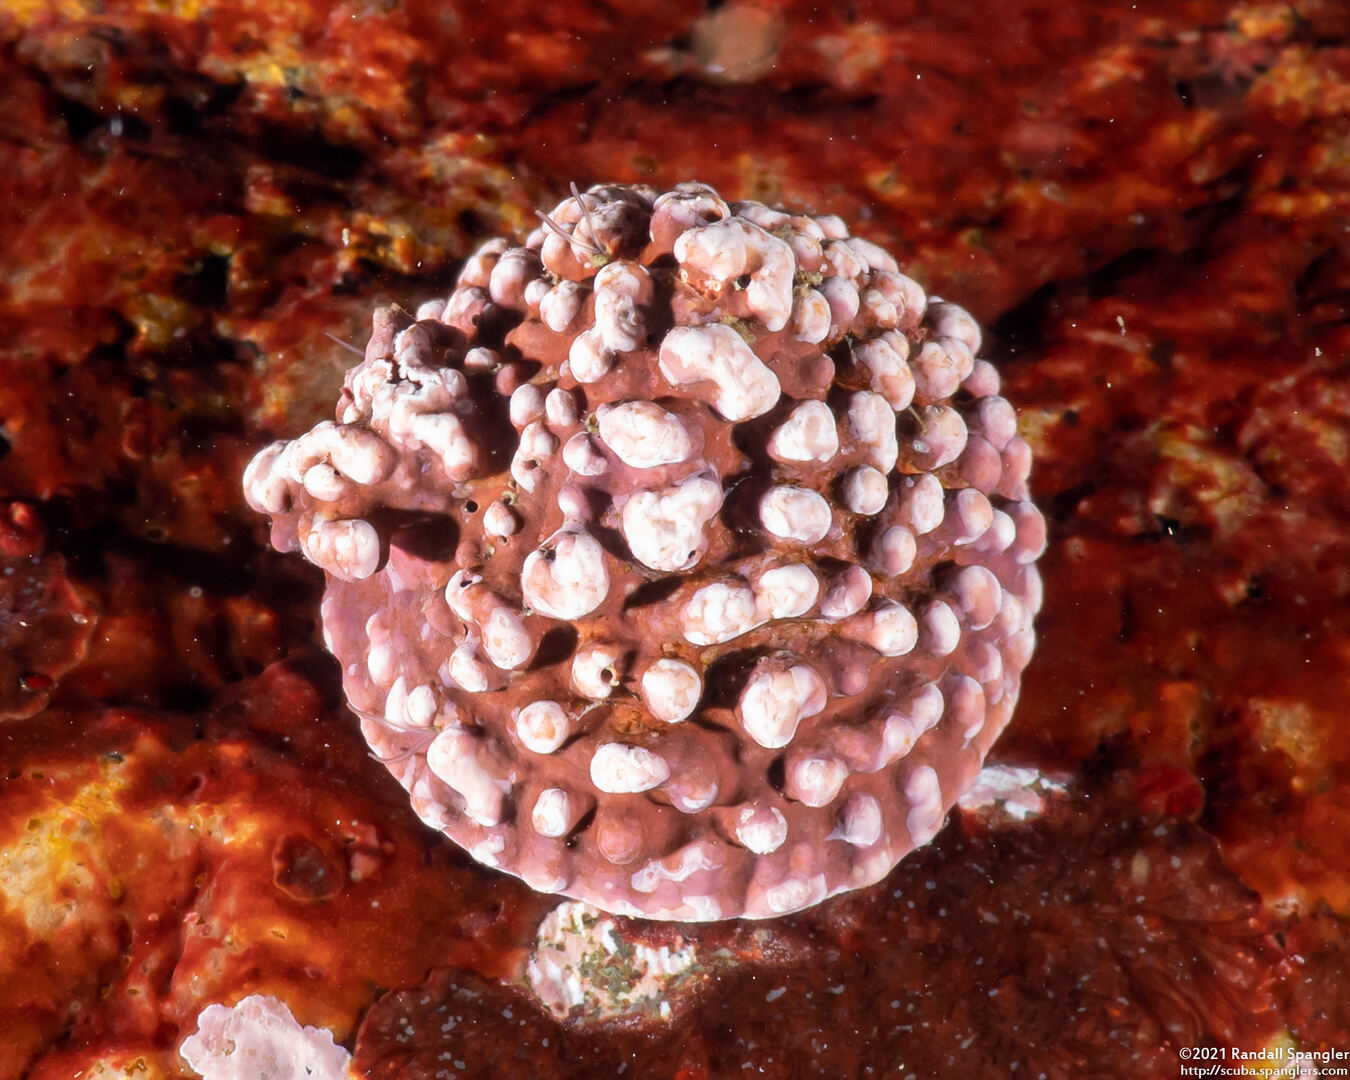 Order Corallinales (Encrusting Coralline Algae); On a limpet shell